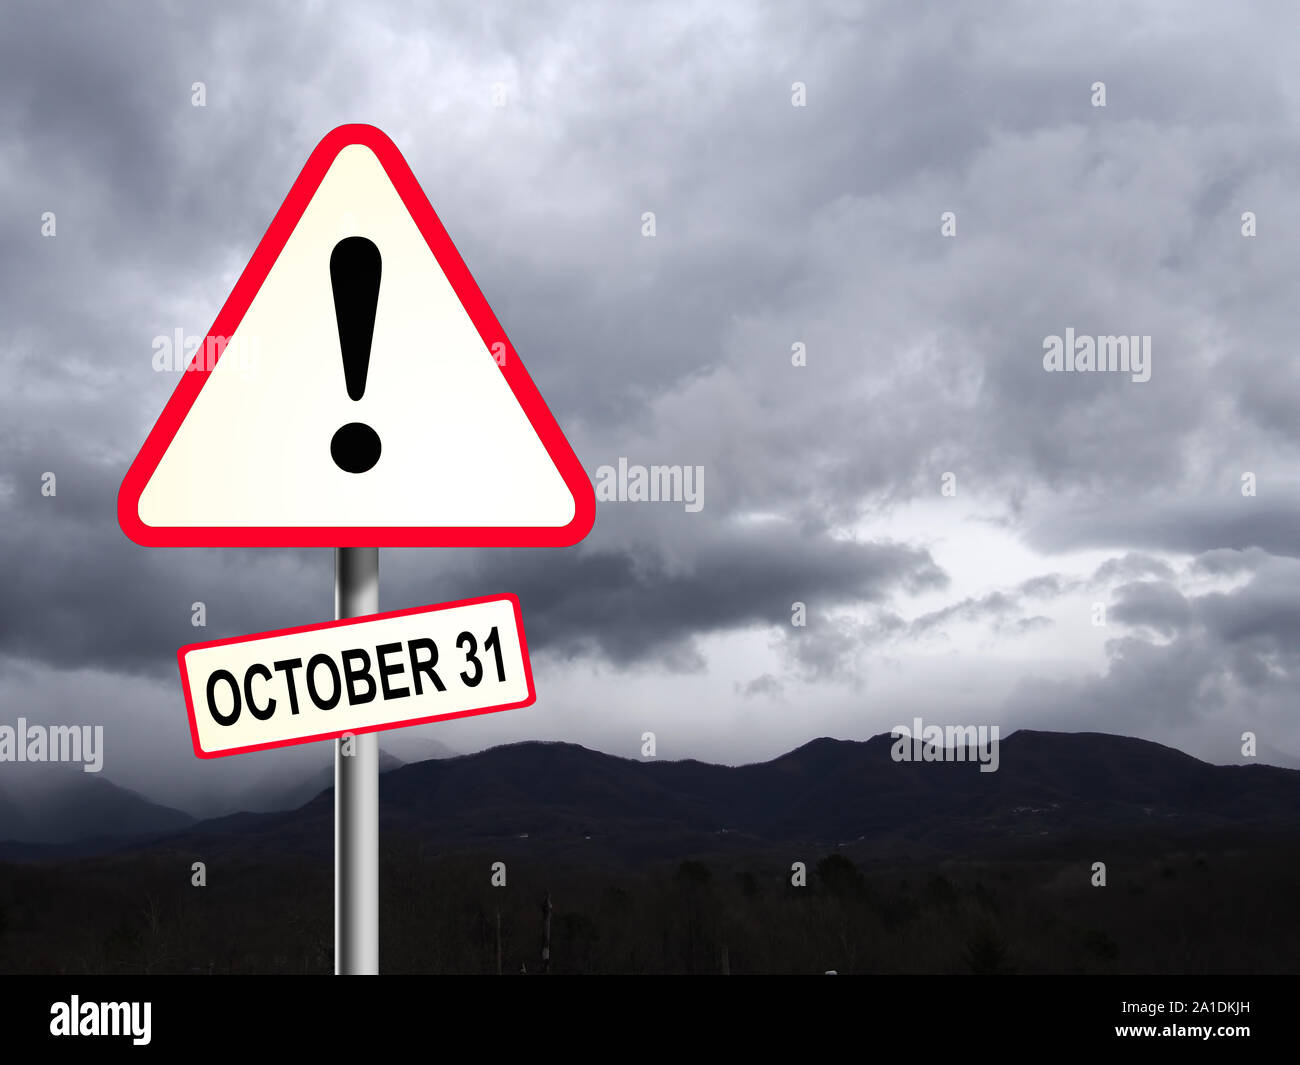 Red and white UK triangular road sign with a Brexit Danger Warning Ahead. October concept. Stormy sky behind. Stock Photo